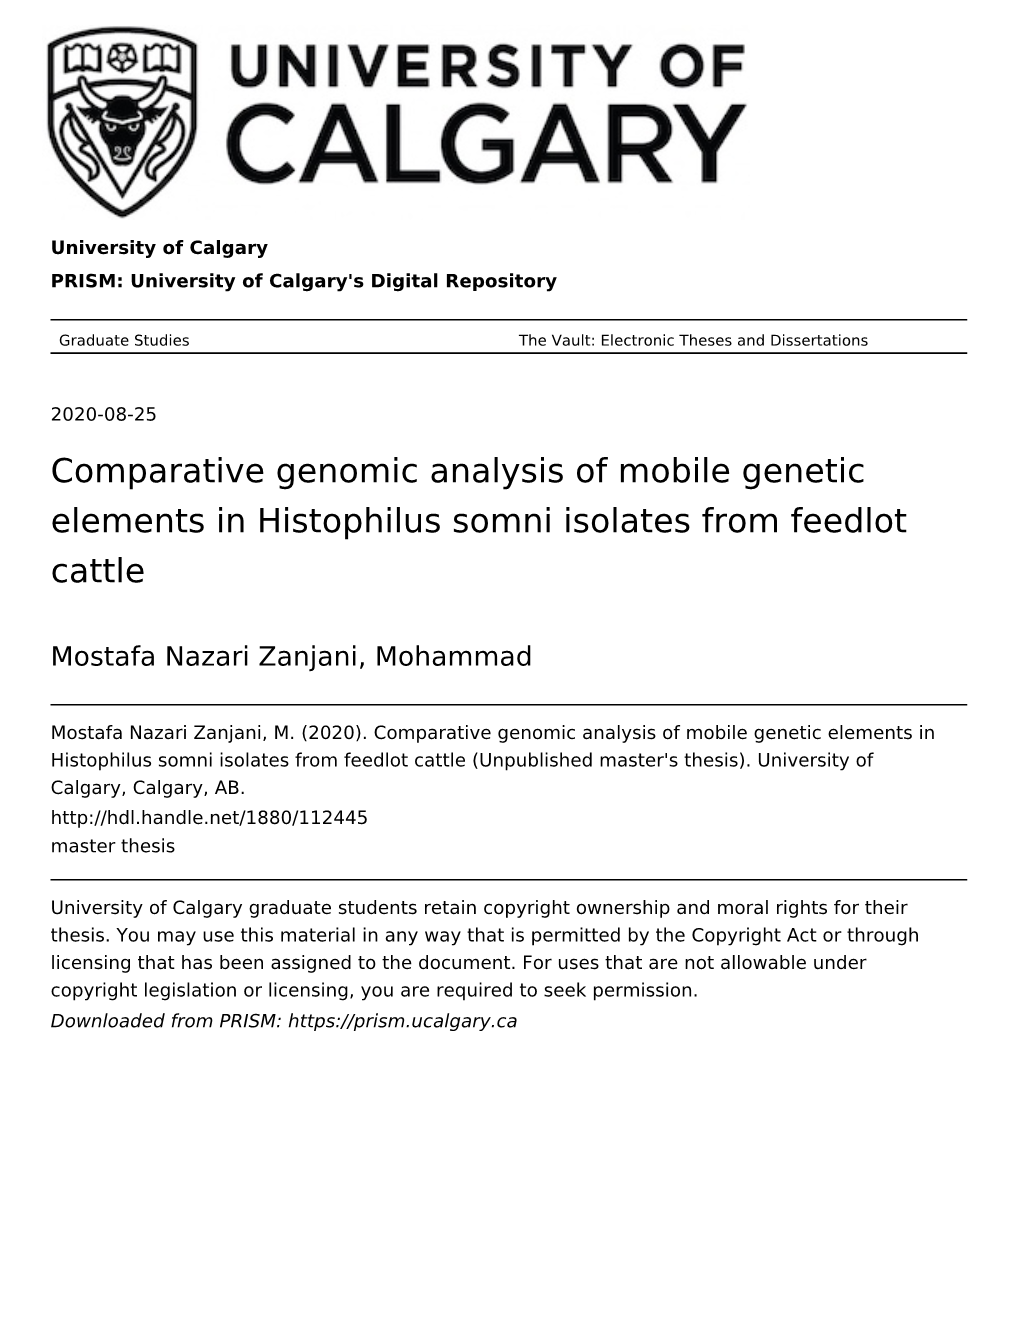 Comparative Genomic Analysis of Mobile Genetic Elements in Histophilus Somni Isolates from Feedlot Cattle